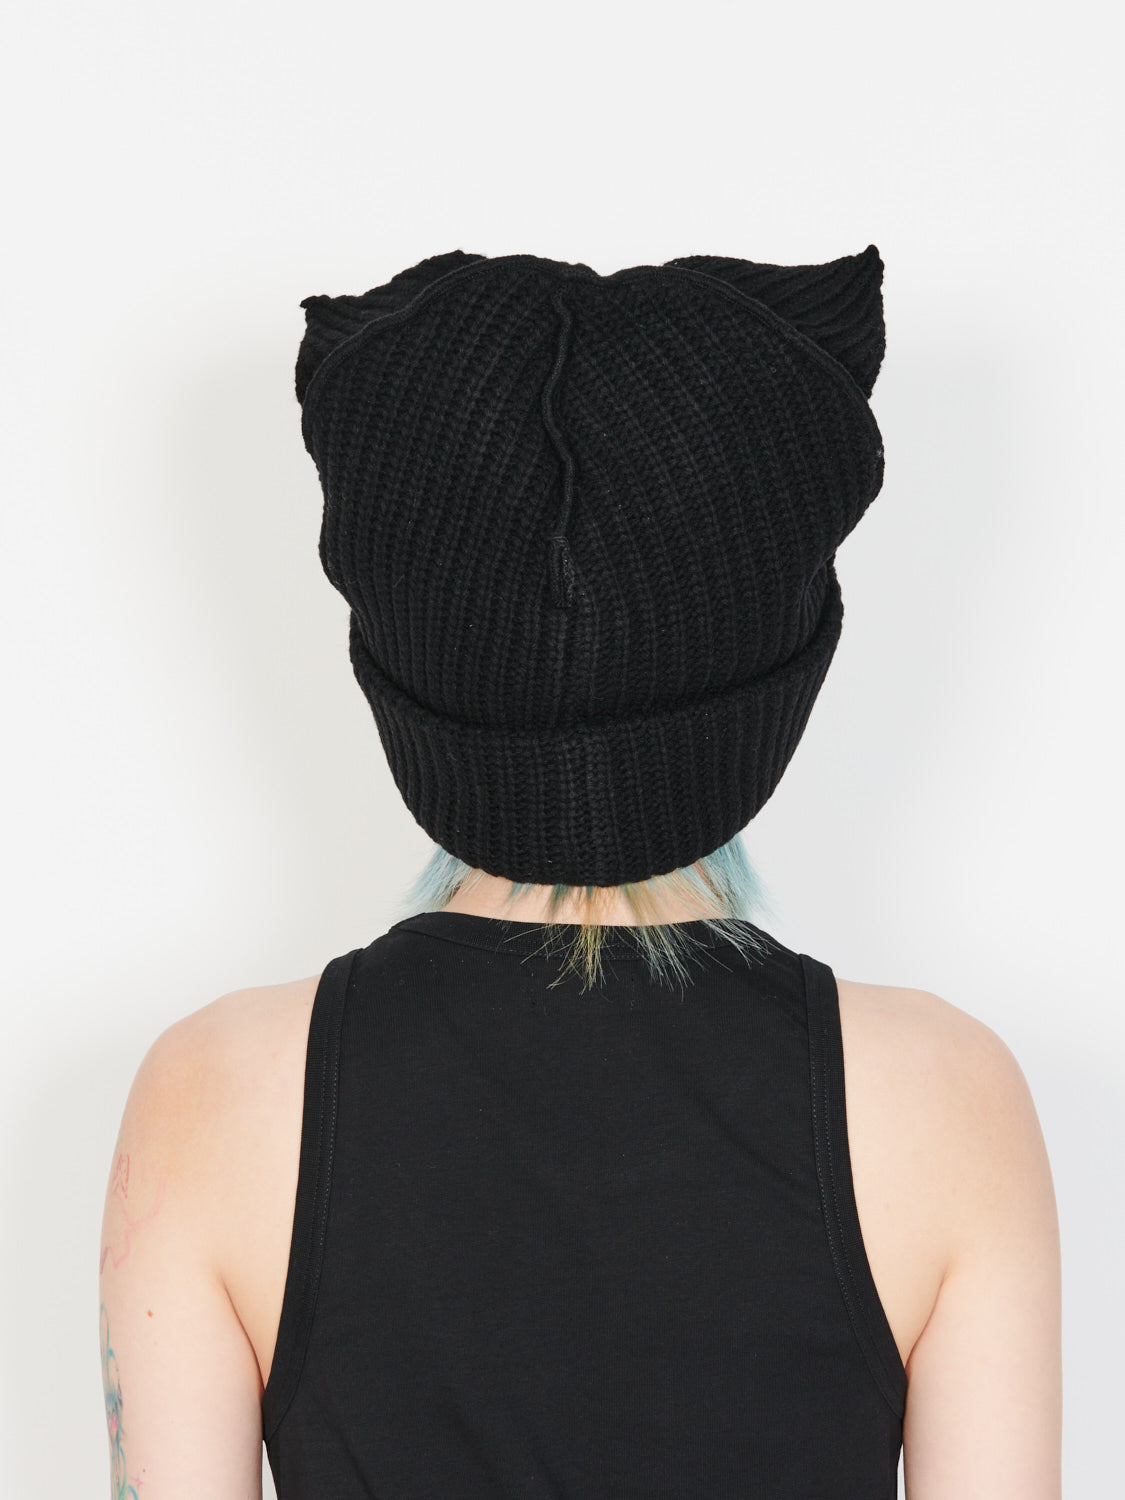 SUPERSIZED CHUNKY EARS BEANIE | Charles Jeffrey LOVERBOY